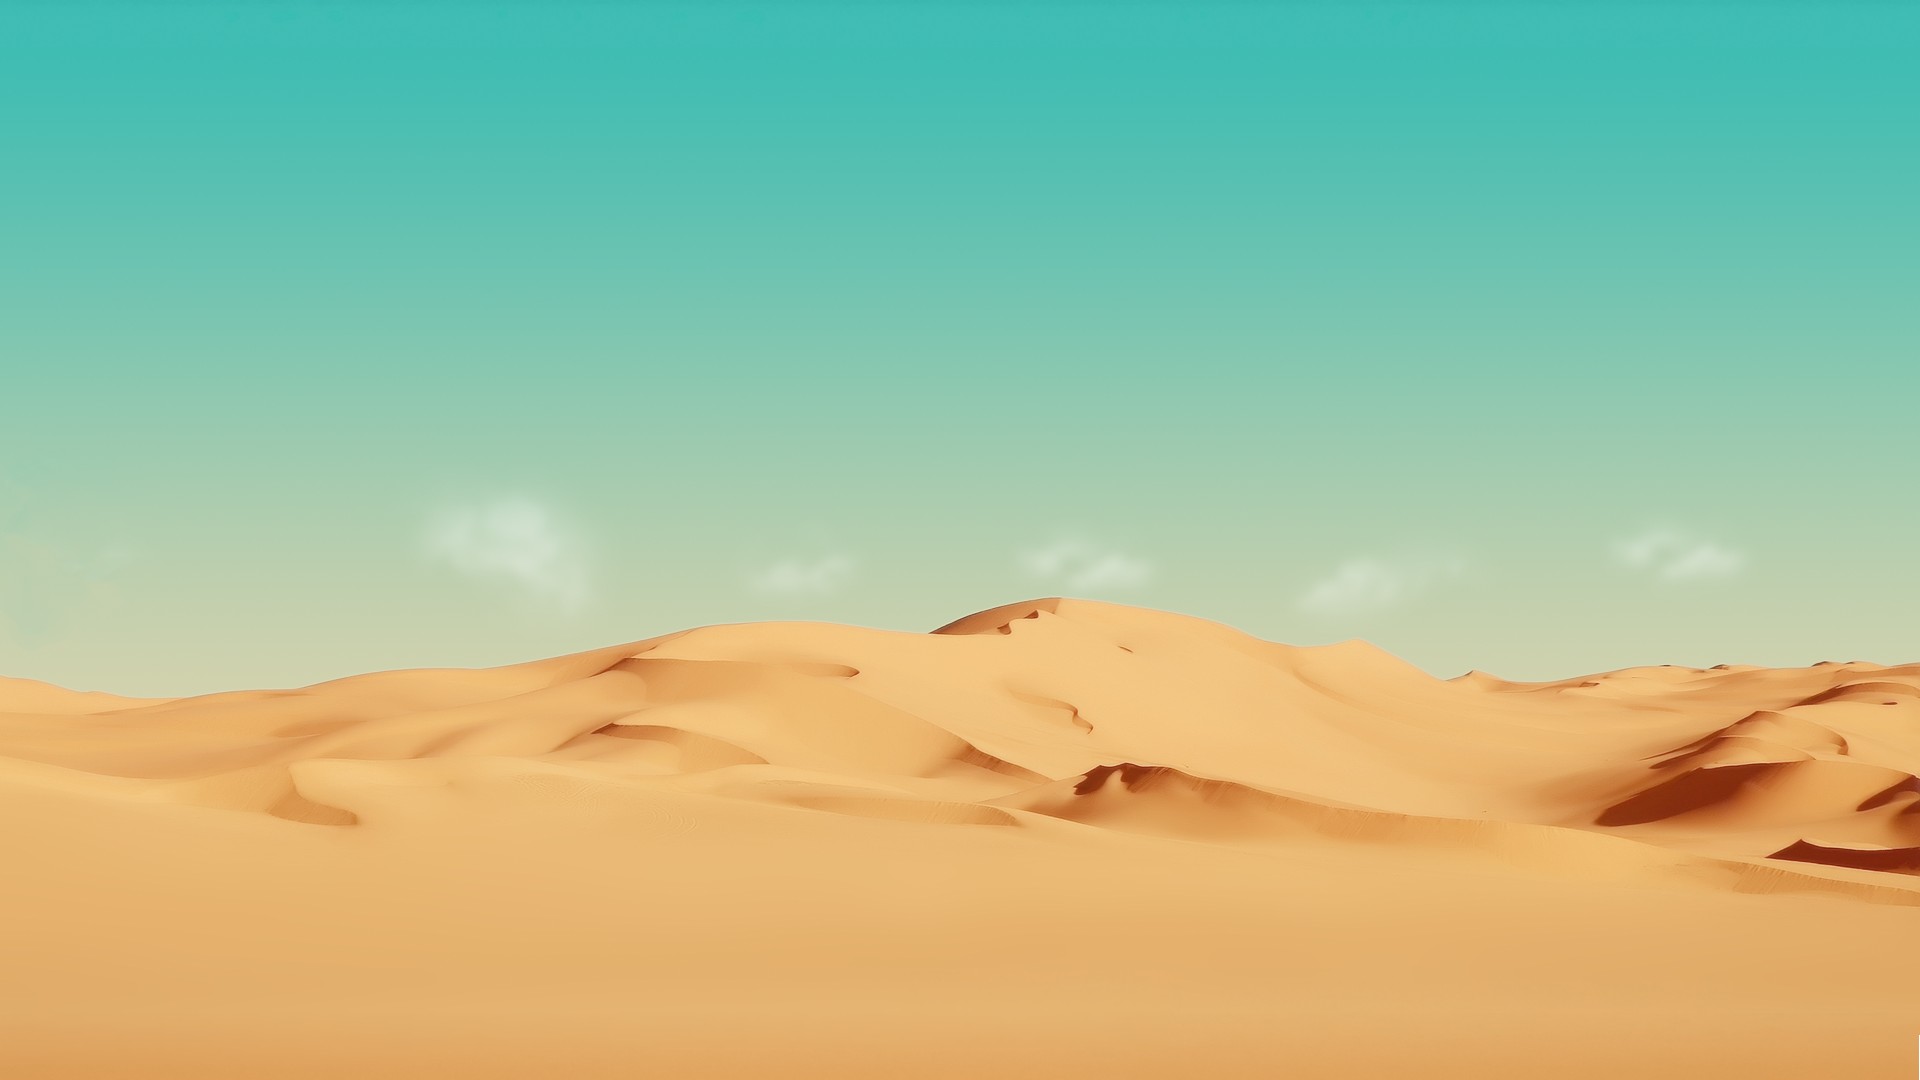 Dune 2021 Wallpapers 57 images inside